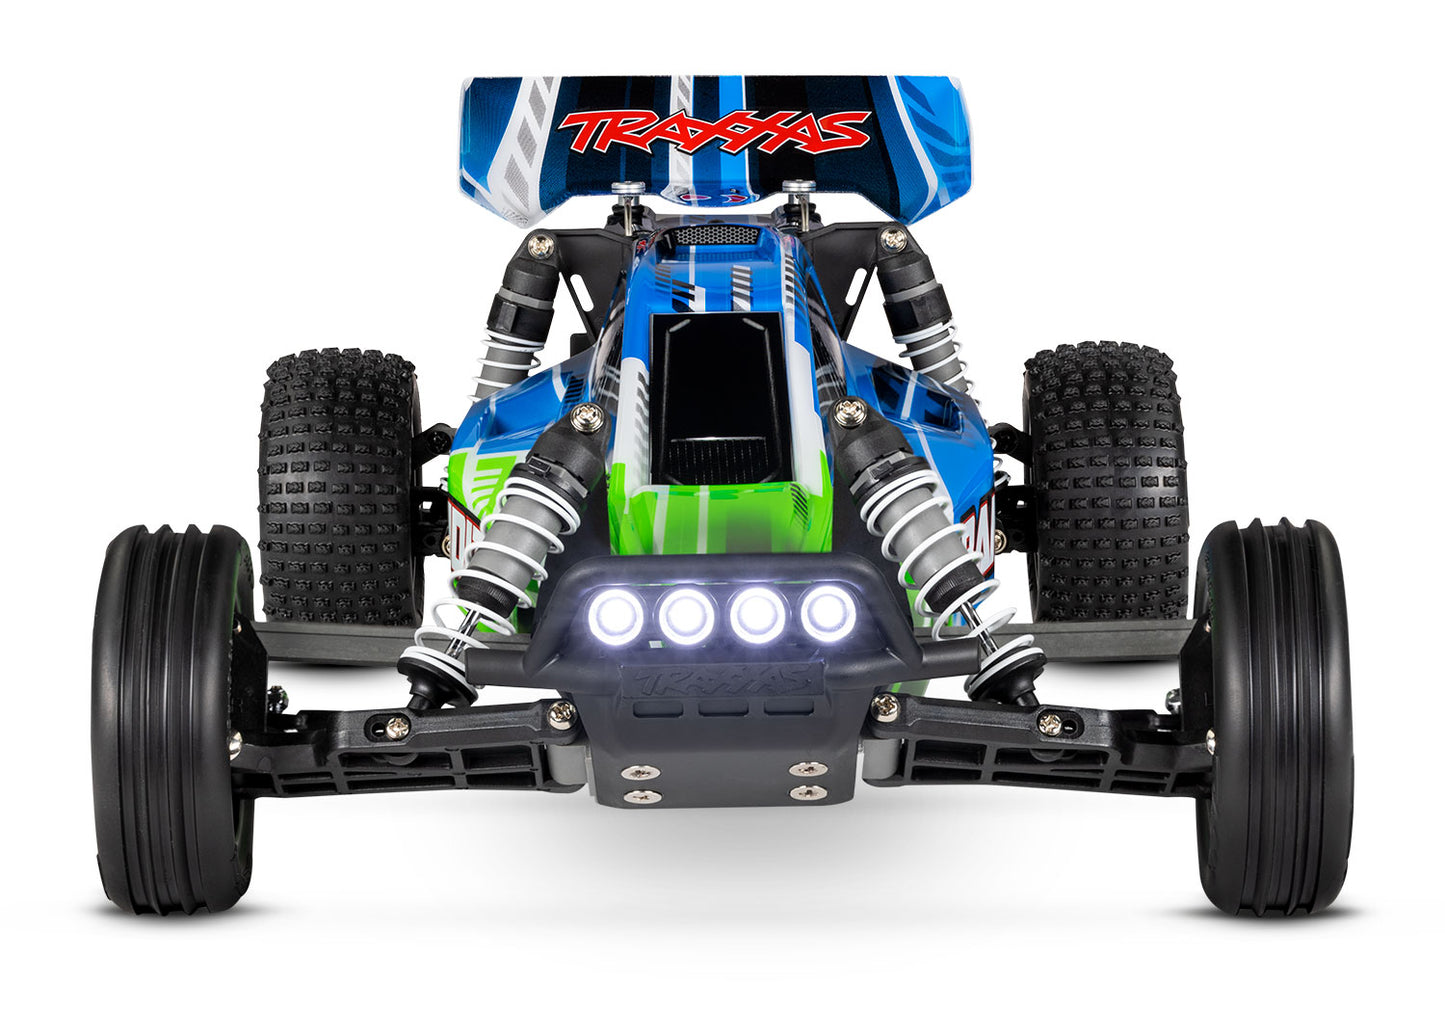 Traxxas Bandit 1/10 RTR Buggy with Led Light (Battery & DC Charger)